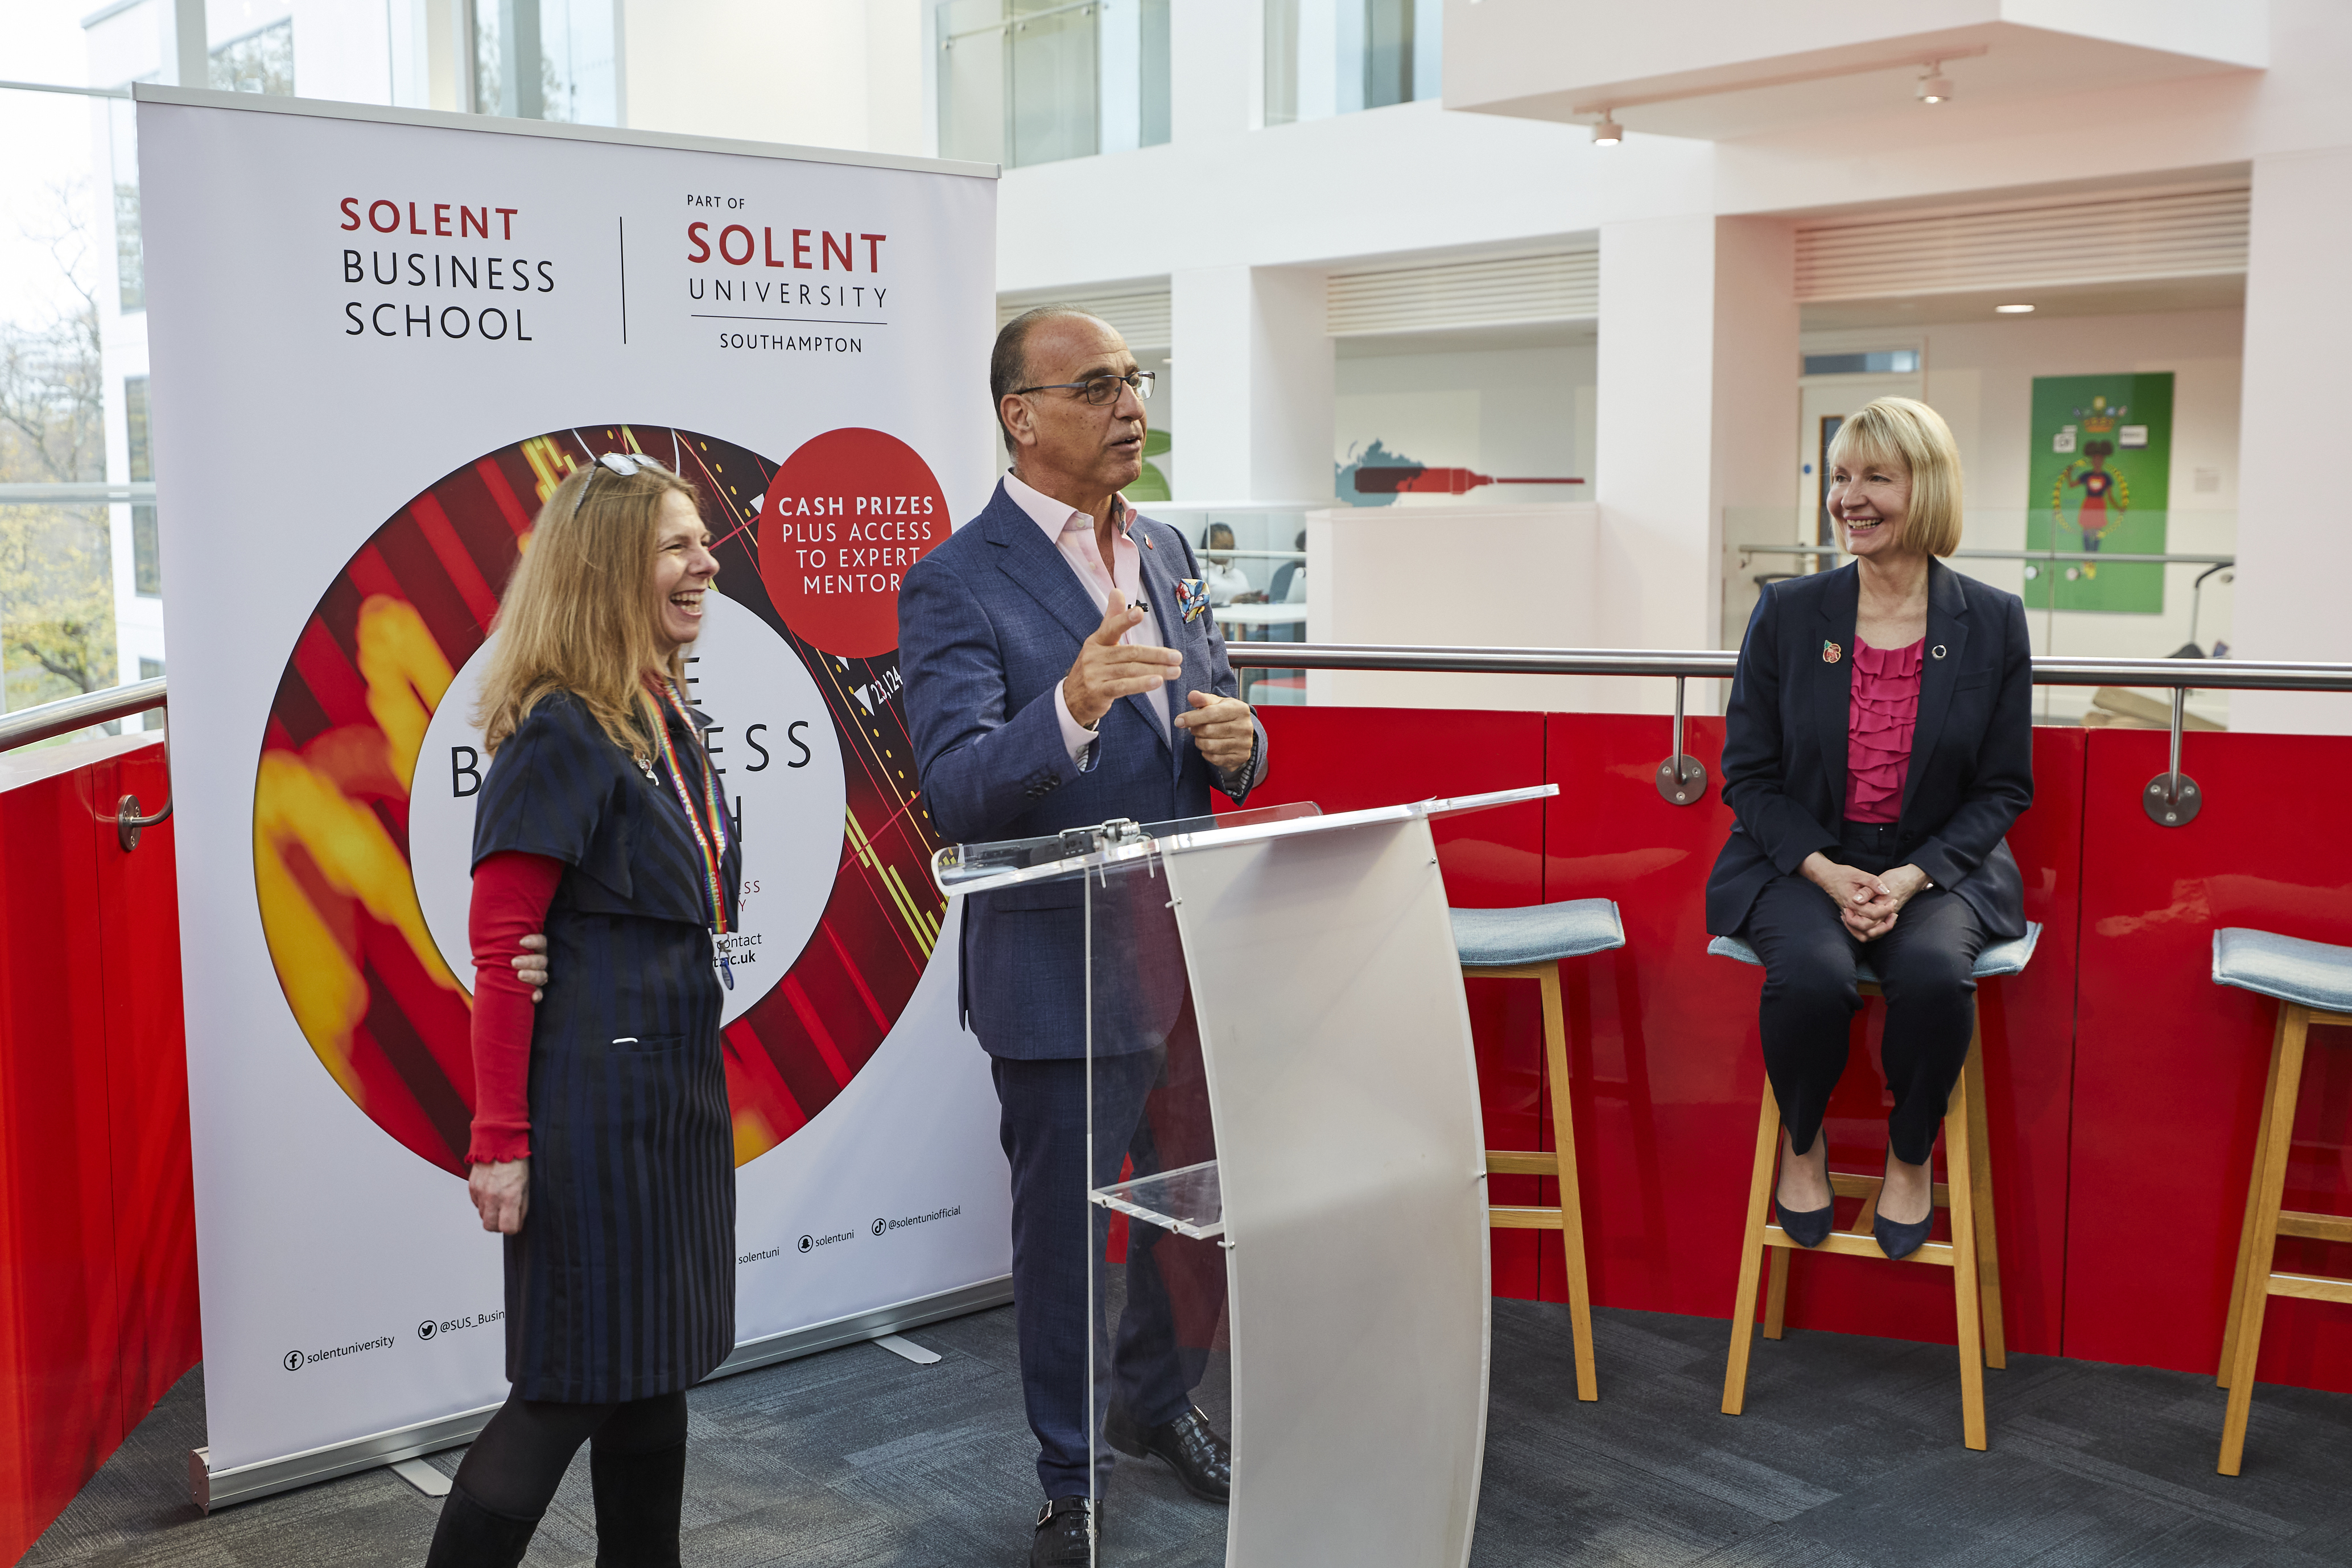 Director of Solent Business School, Caroline Walsh with Theo Paphitis and Vice-Chancellor Karen Stanton